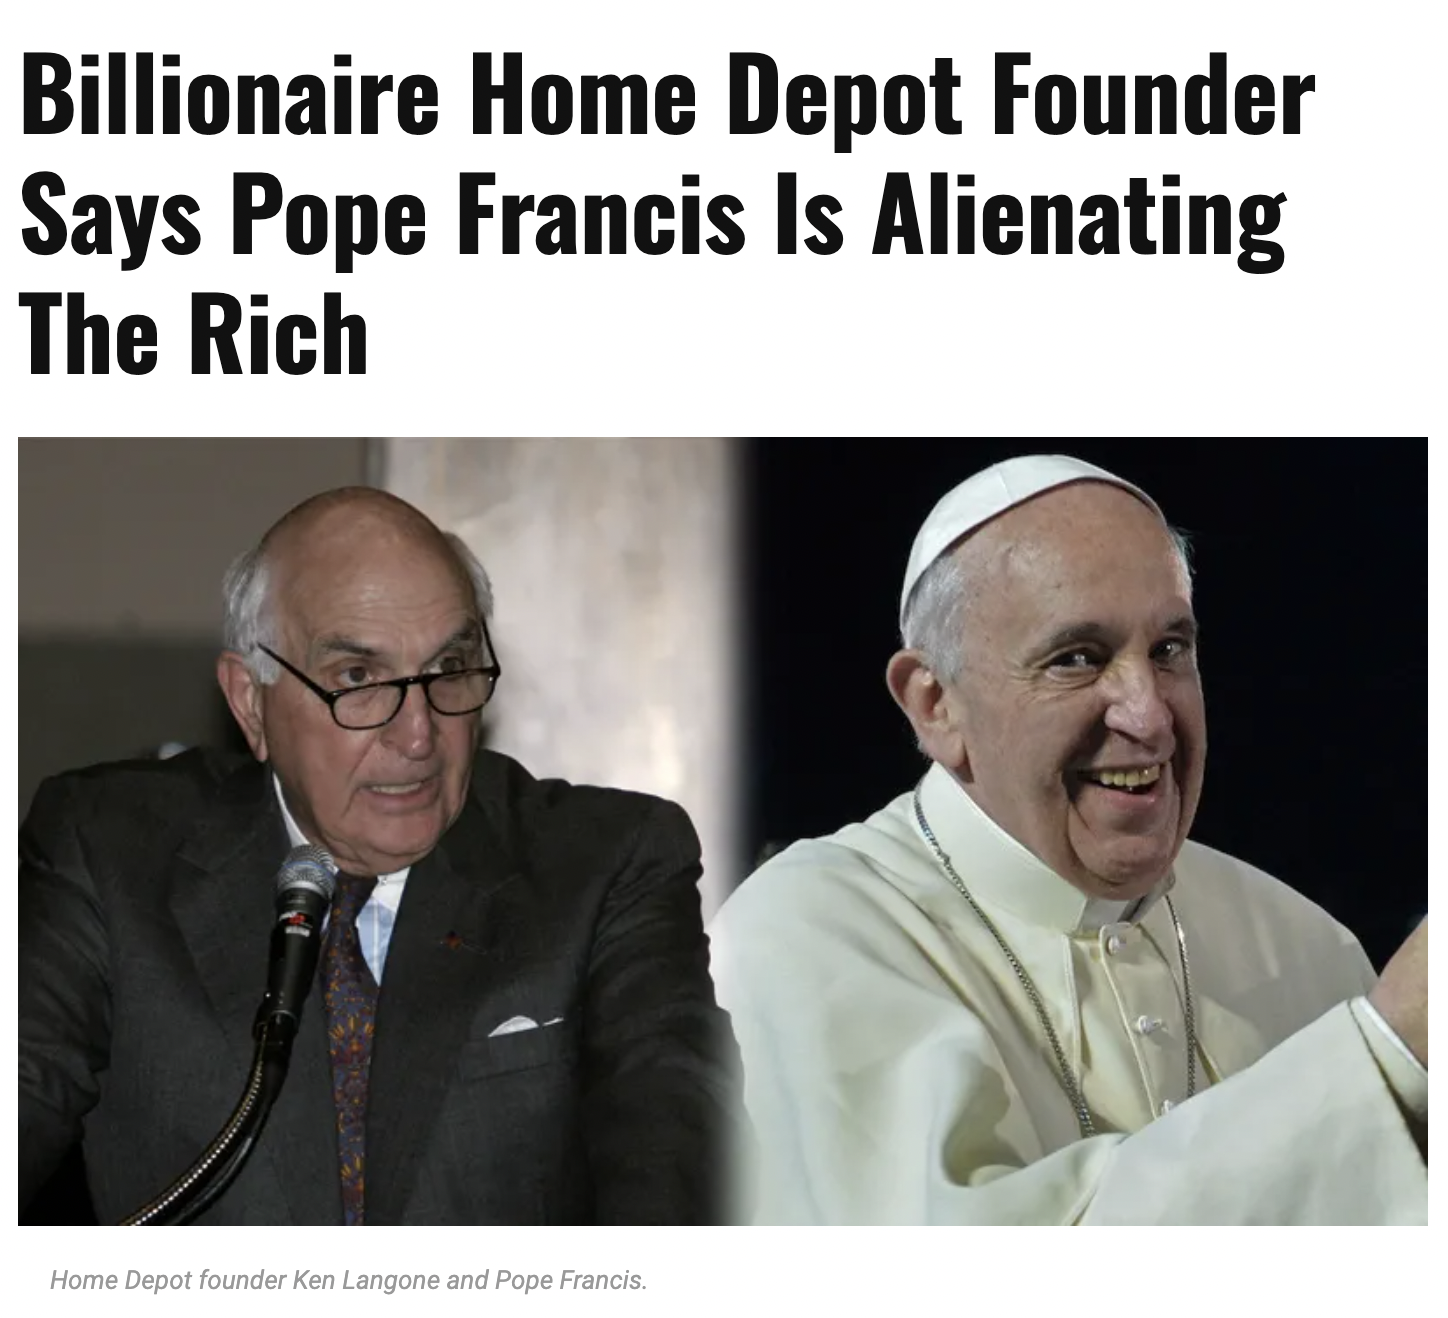 Billionaire Home Depot Founder Says Pope Francis Is Alienating The Rich Home Depot founder Ken Langone and Pope Francis.